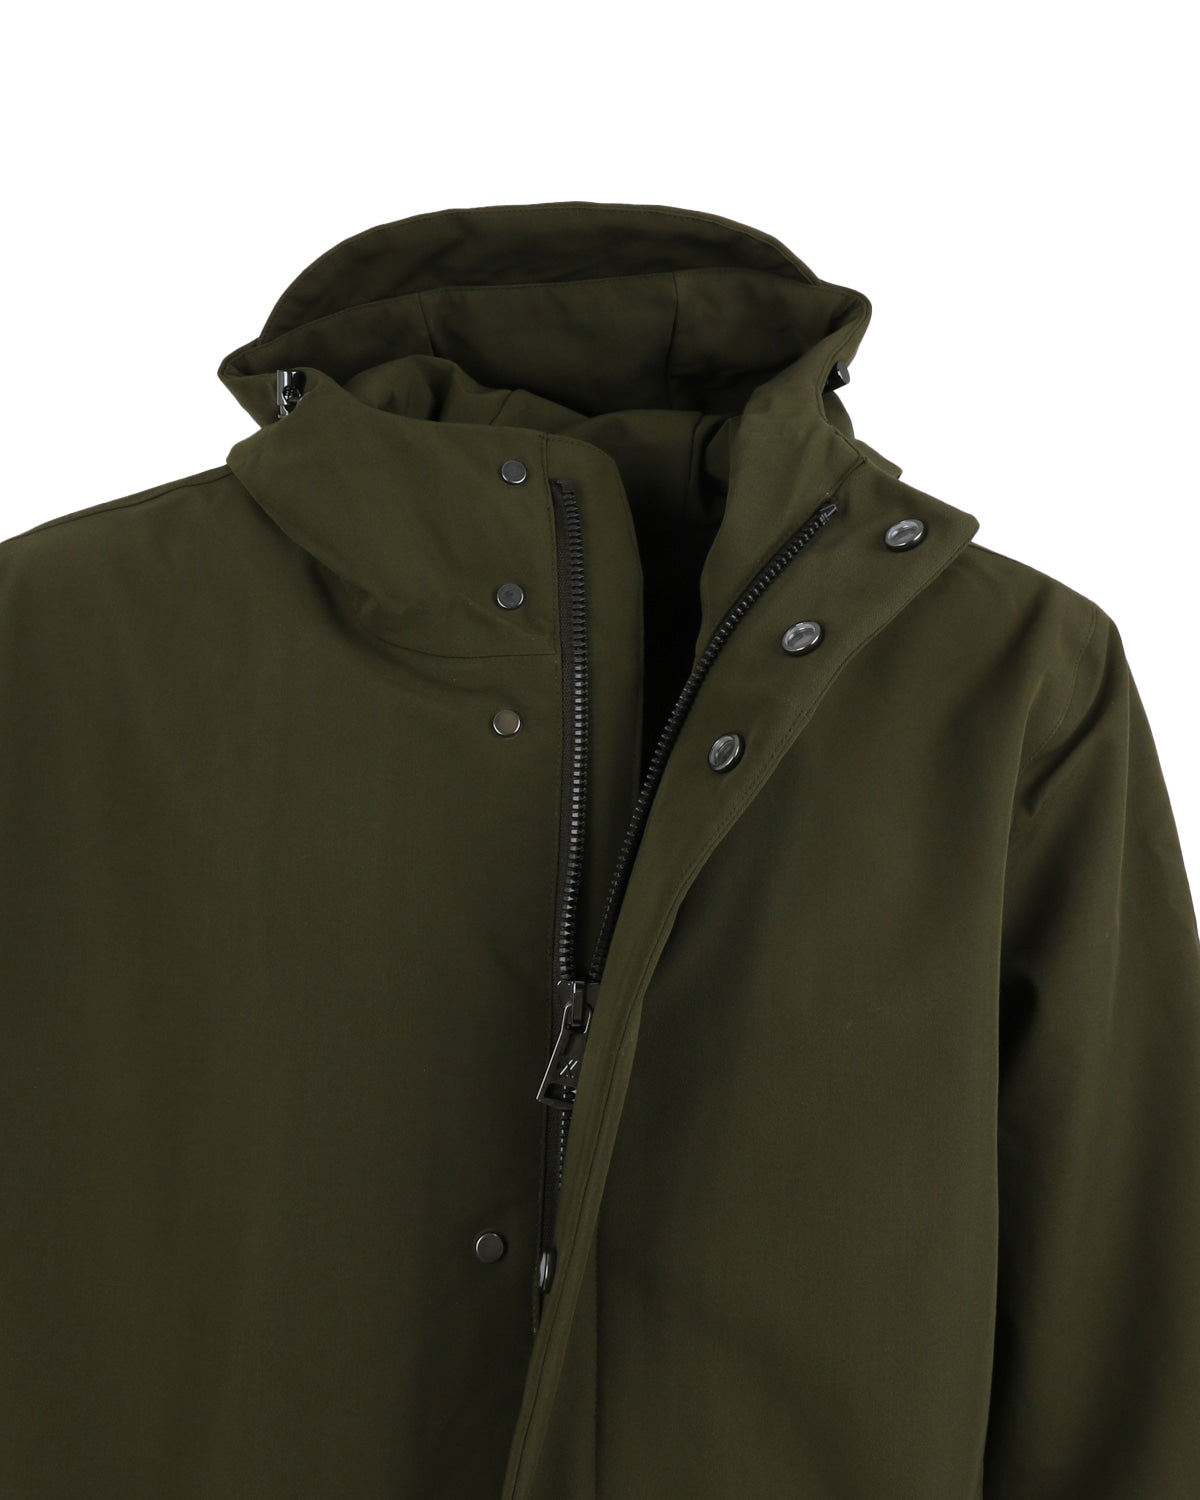 welter shelter_terror weather parka_deep army_5_5